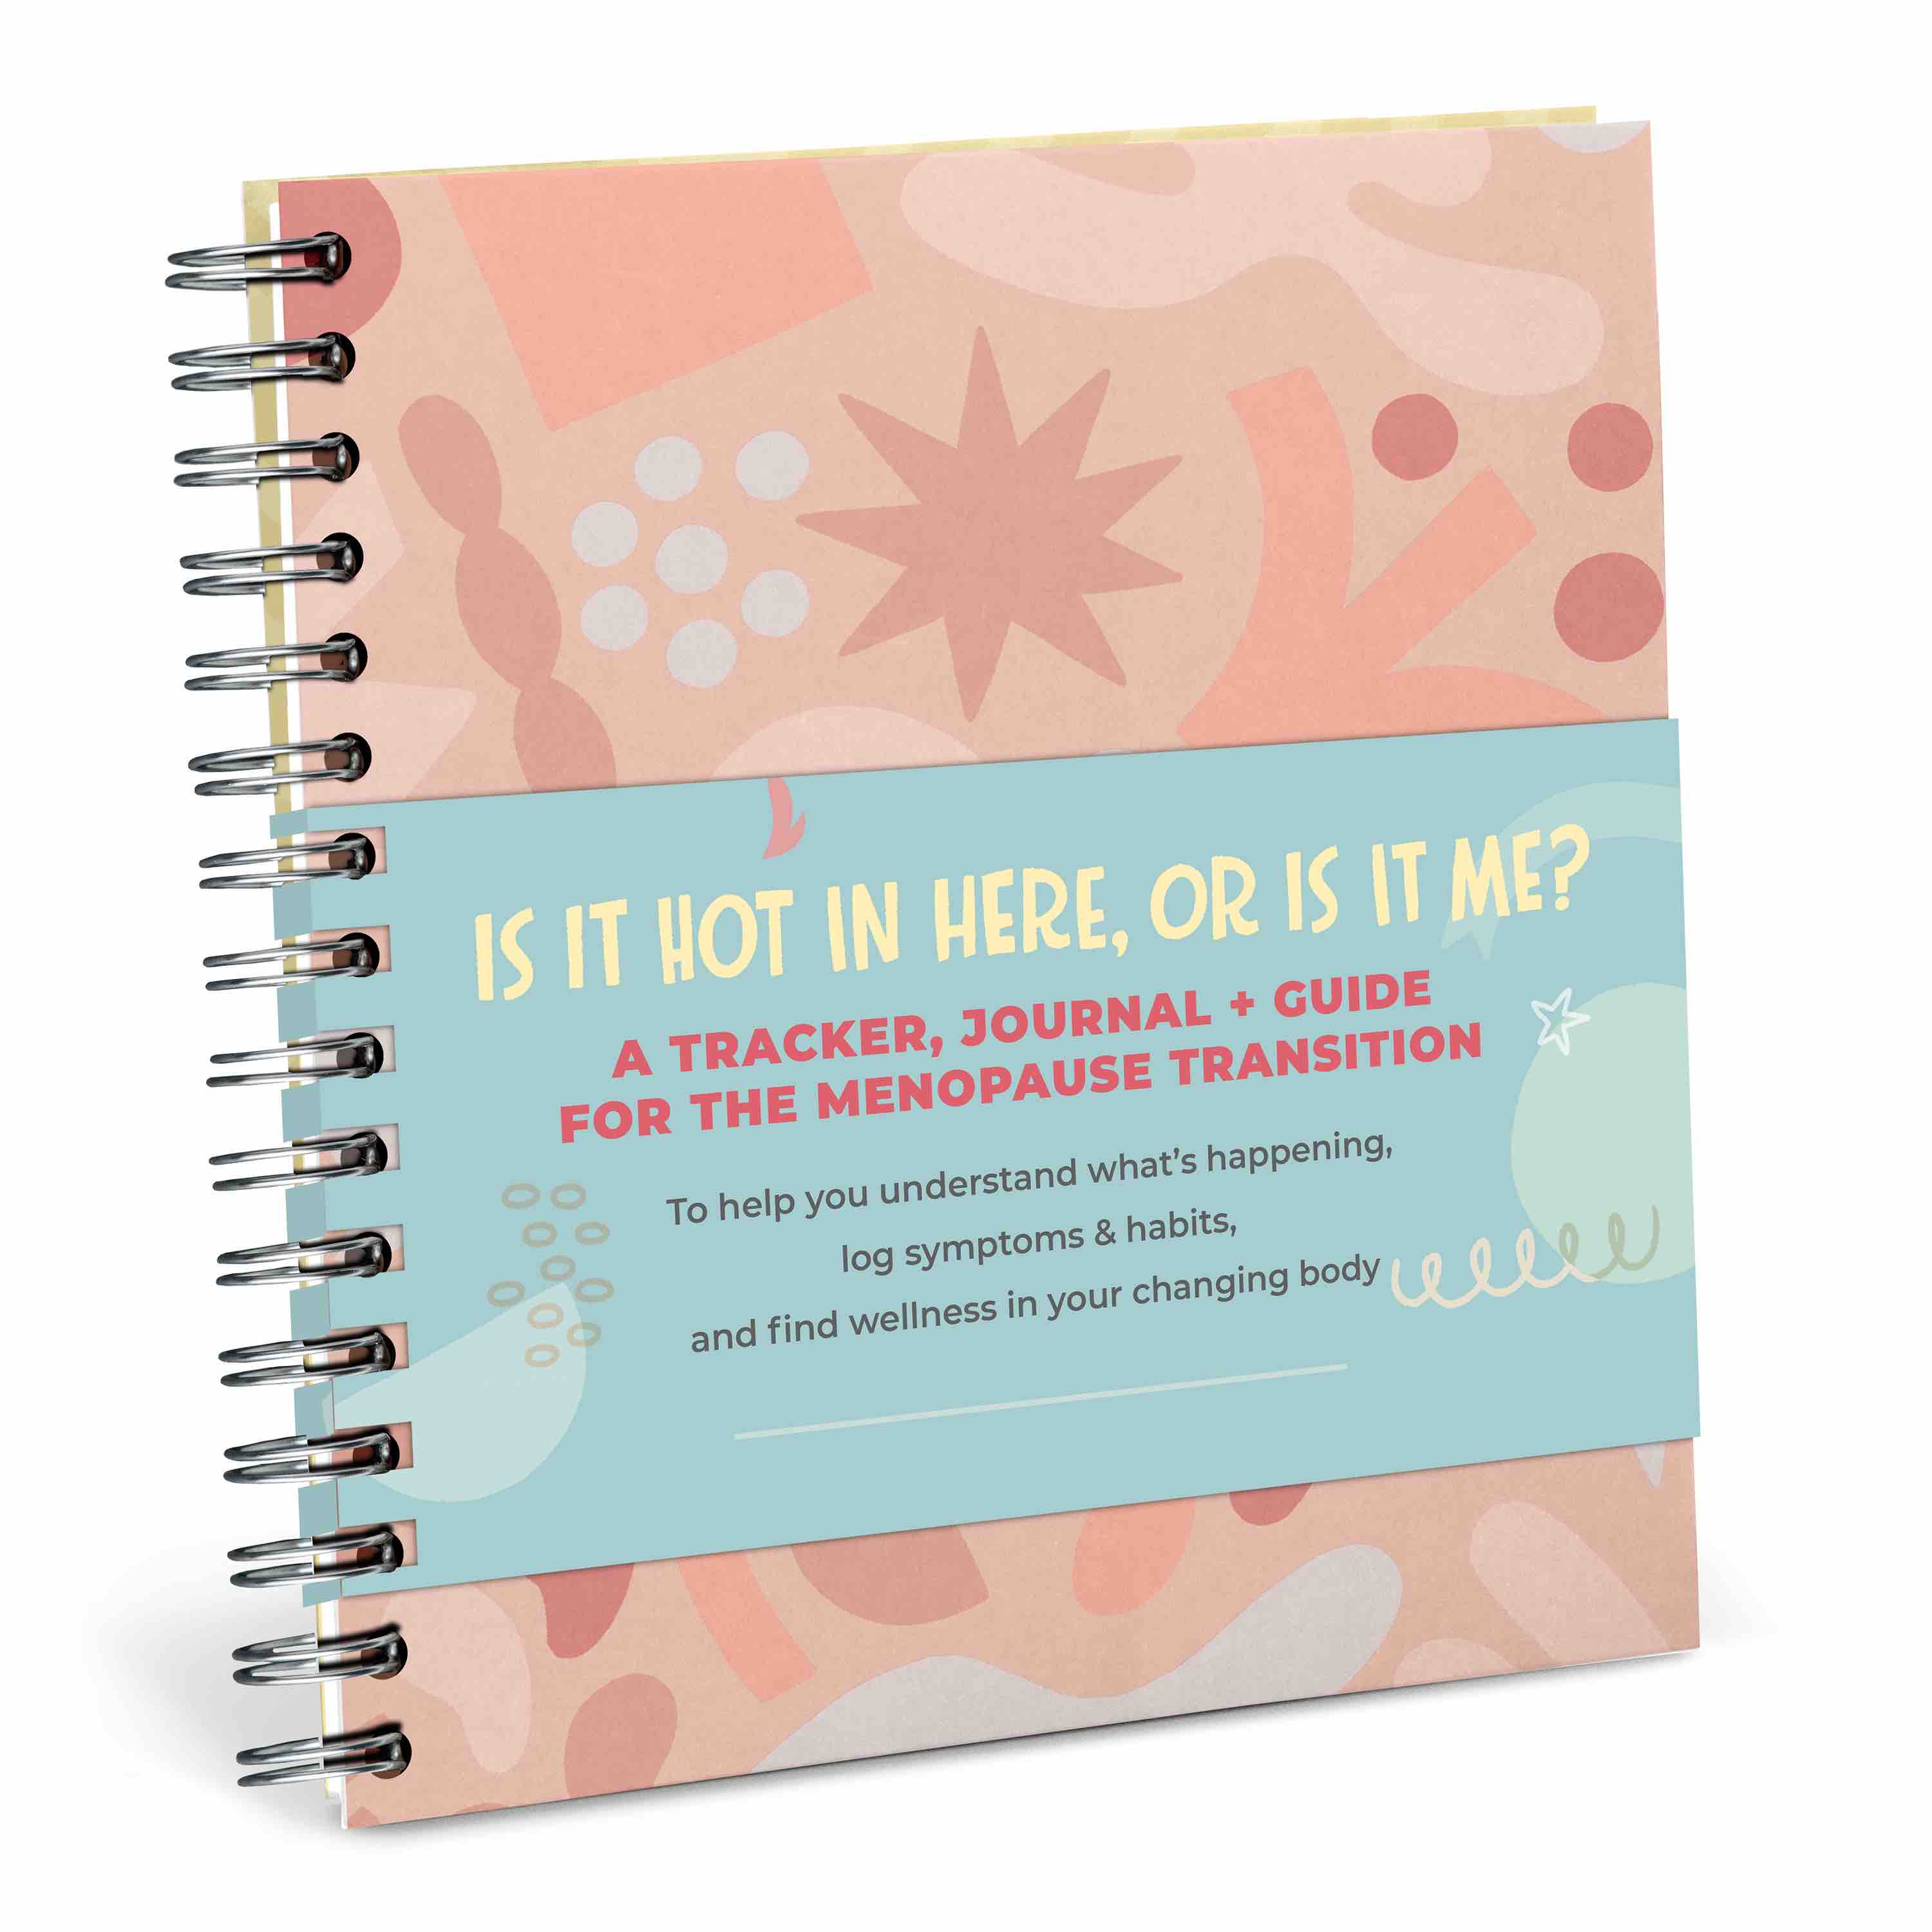 Is It Hot in Here, Or Is It Just Me? A Tracker, Journal + Guide for the Menopause Transition